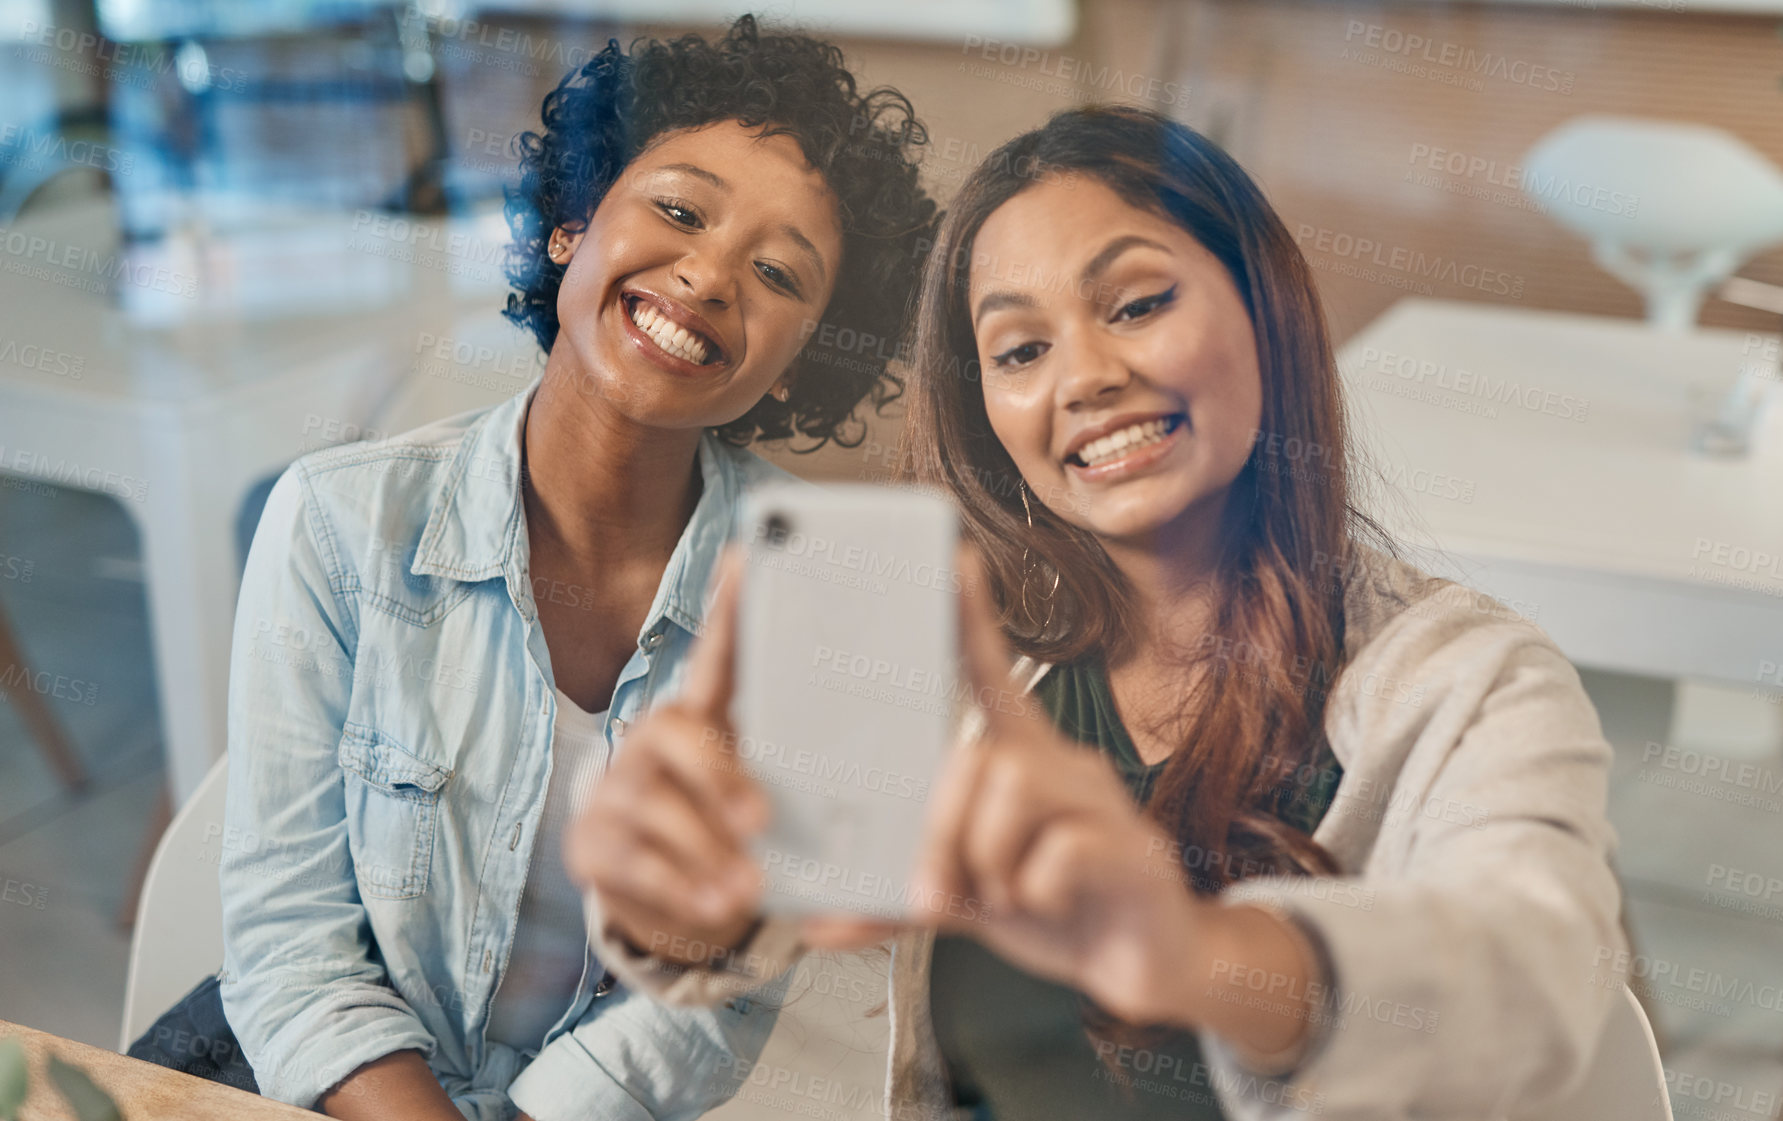 Buy stock photo Shot of two friends taking a selfie while sitting together in a coffee shop